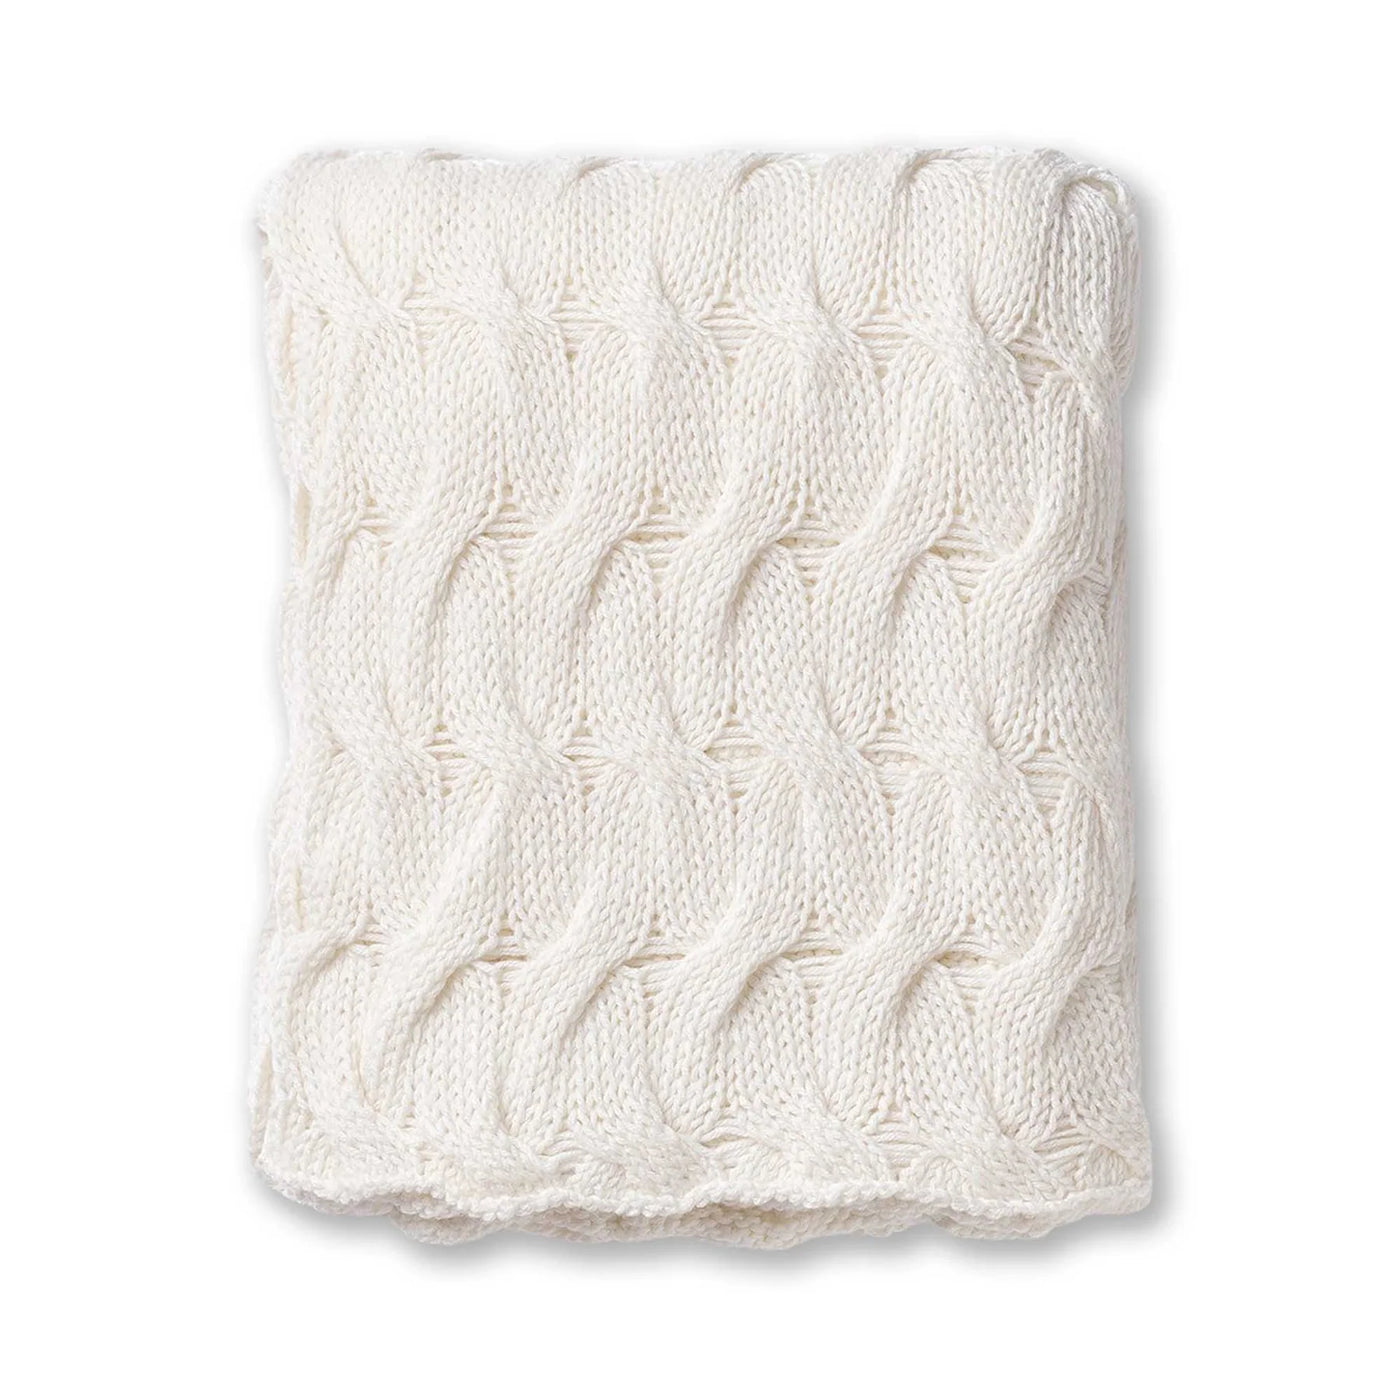 ALICIA ADAMS THROW EVERGLADES (Available in Colors)